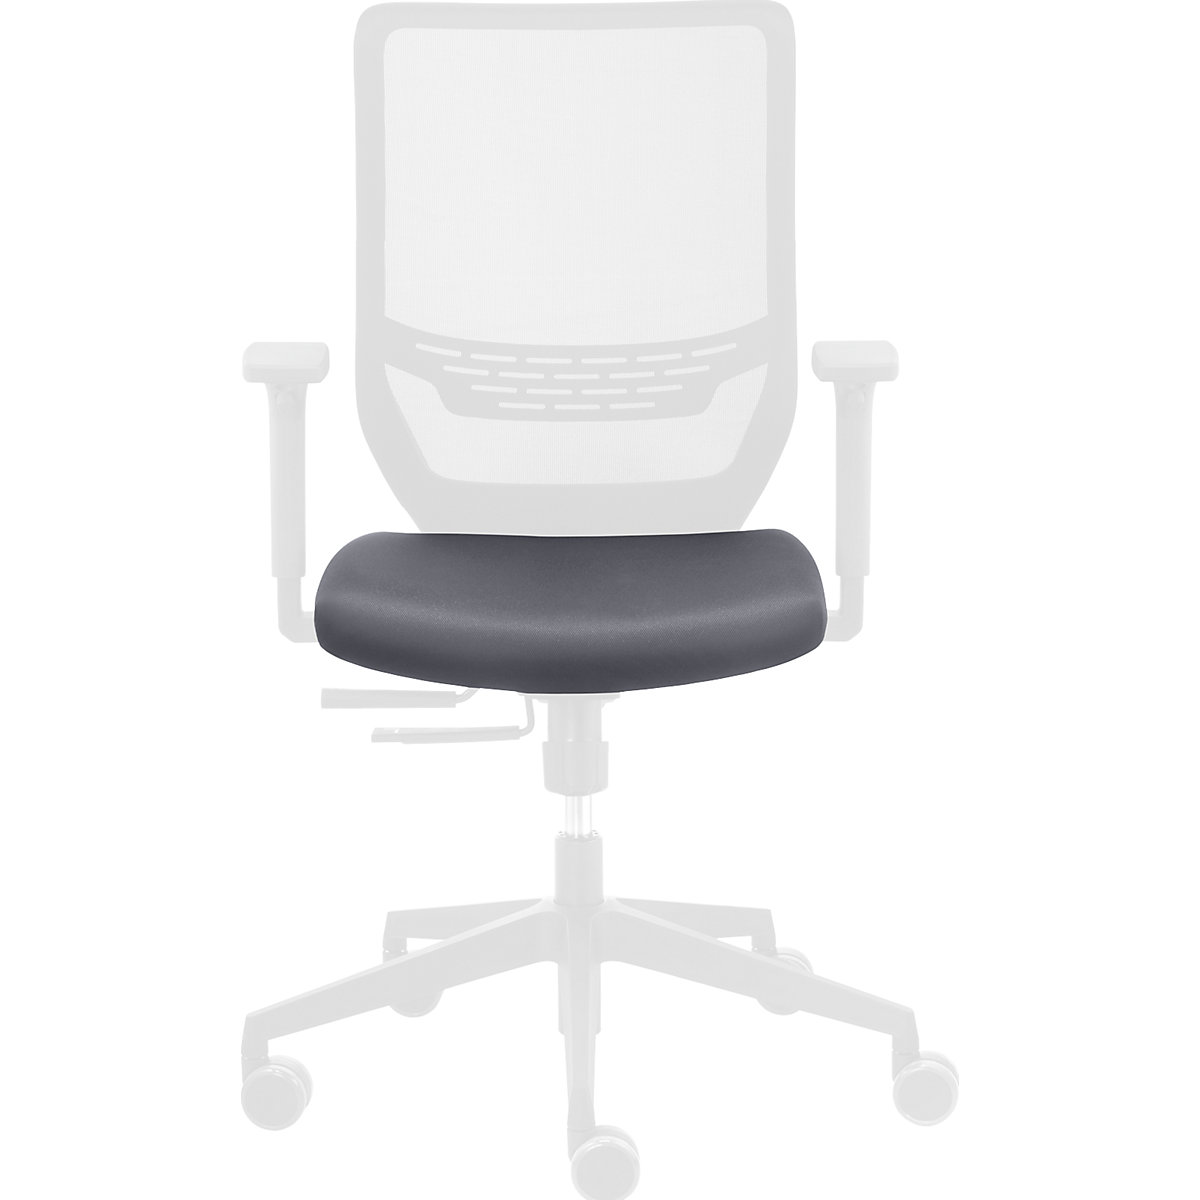 TO-SYNC seat cover – TrendOffice, for office swivel chair, grey-3